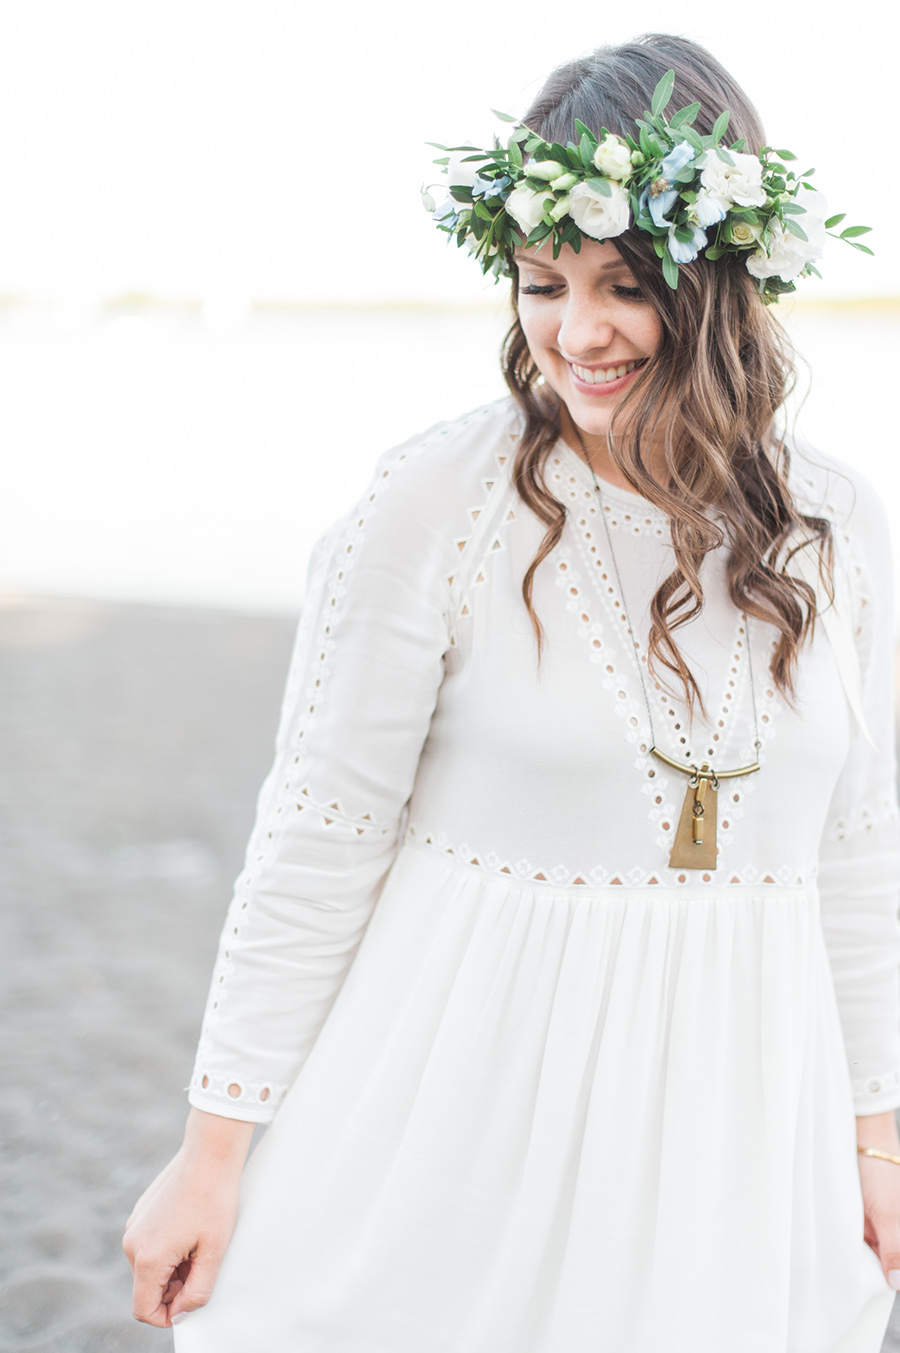 Boho-Summer-Fashion-White-Aritzia-Dress-Real-Floral-Crown - A Side Of Style